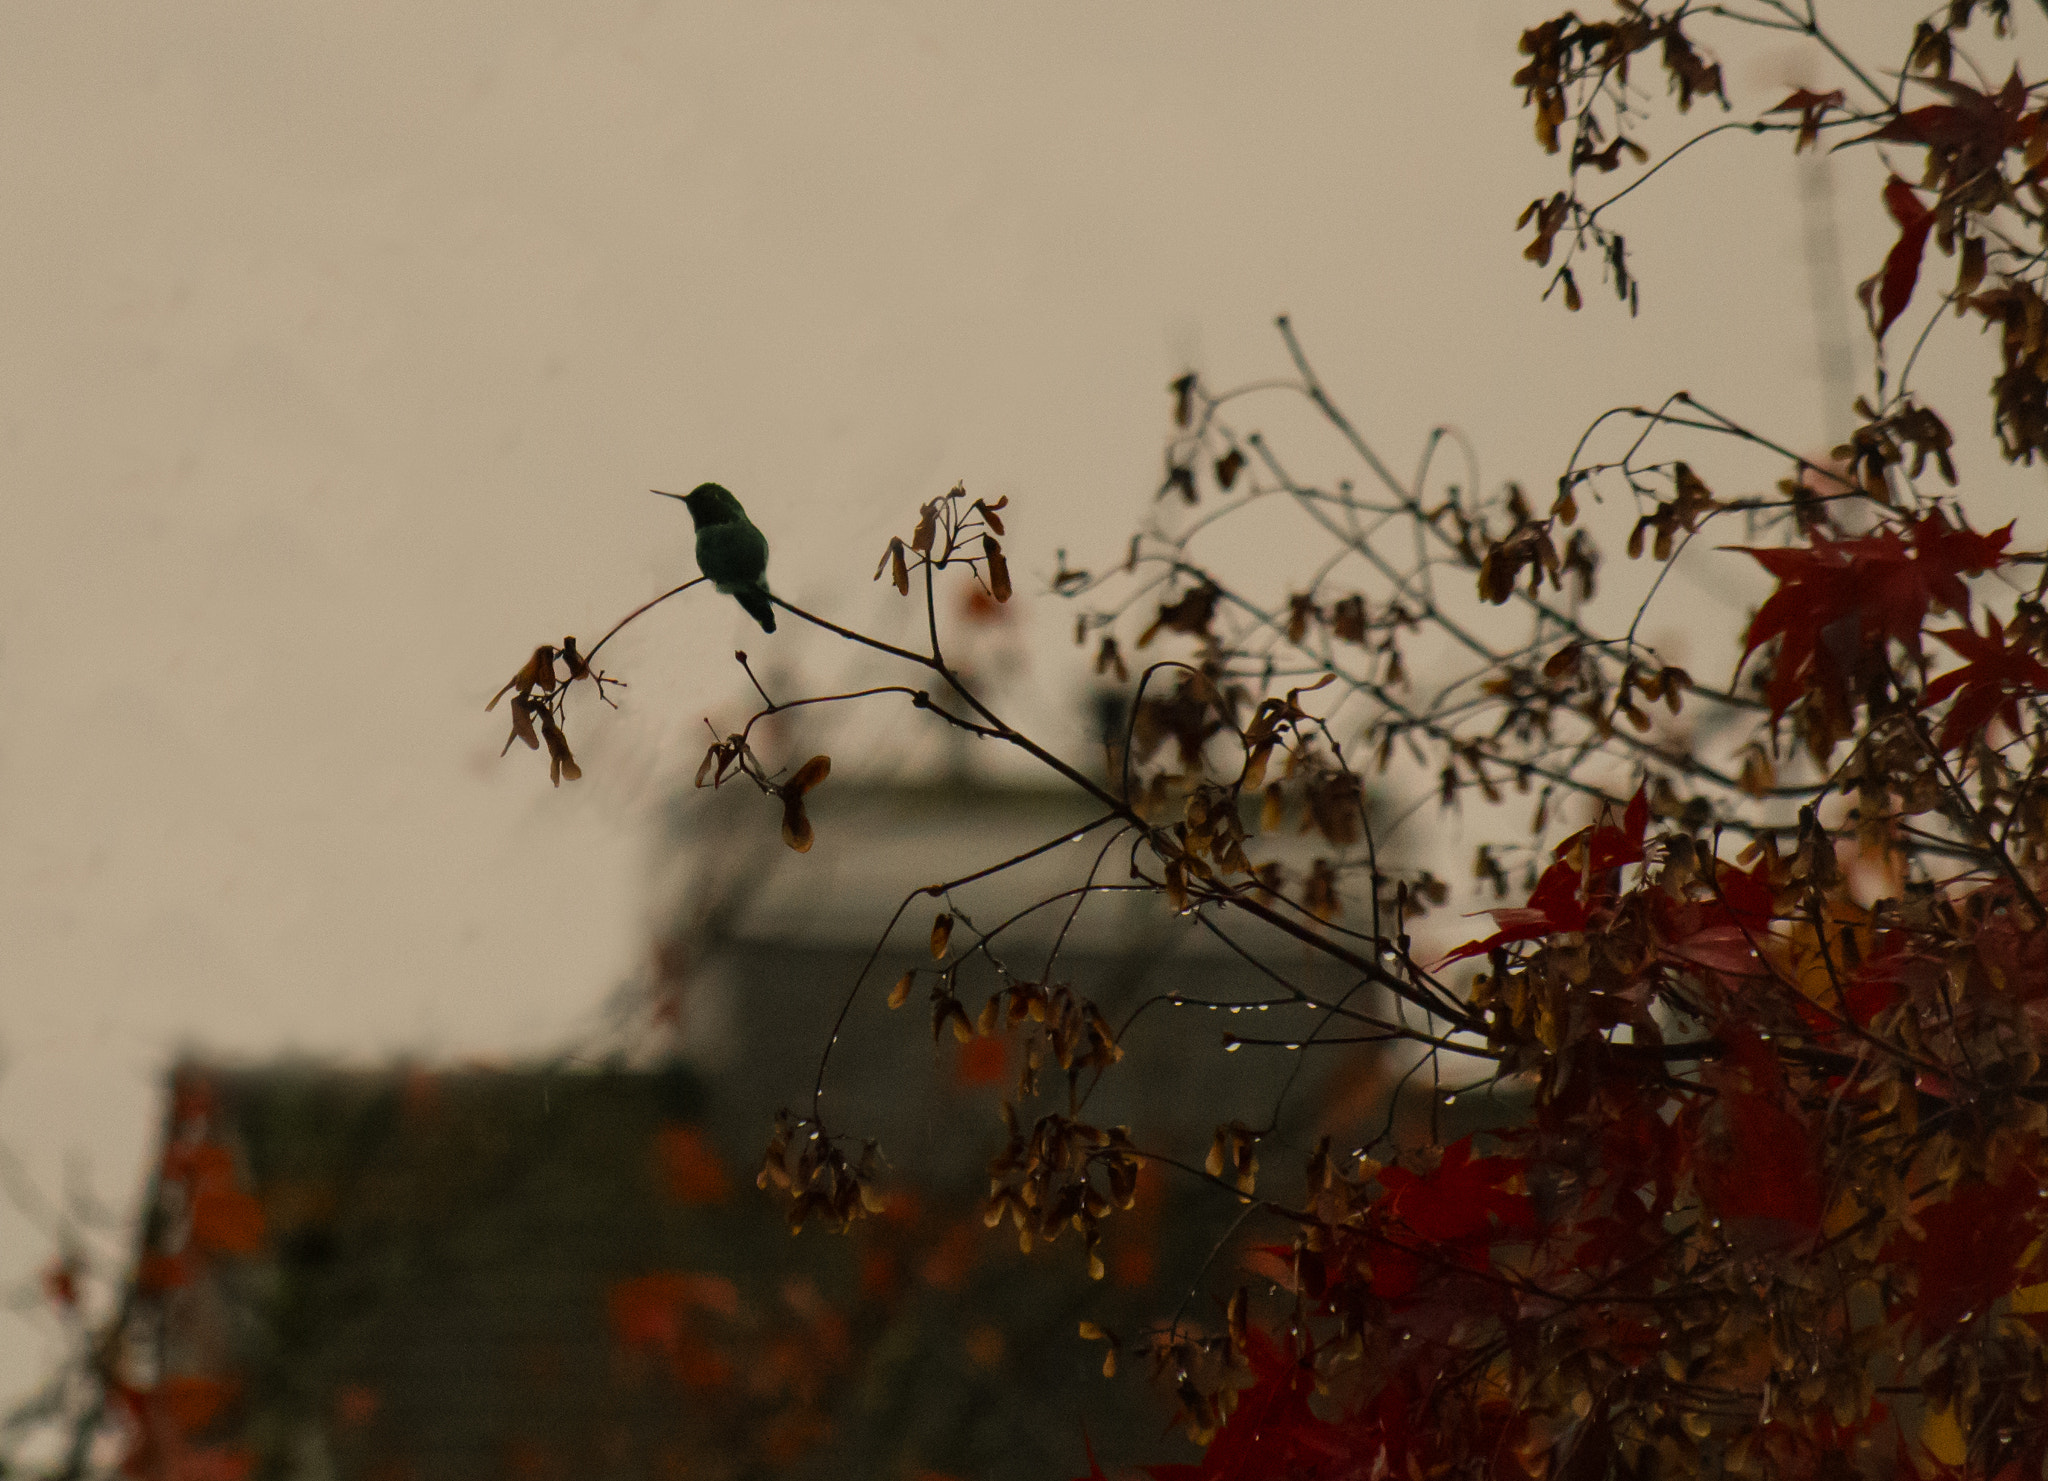 Pentax K-50 sample photo. A hummingbird is silhouetted against a rainy sky photography